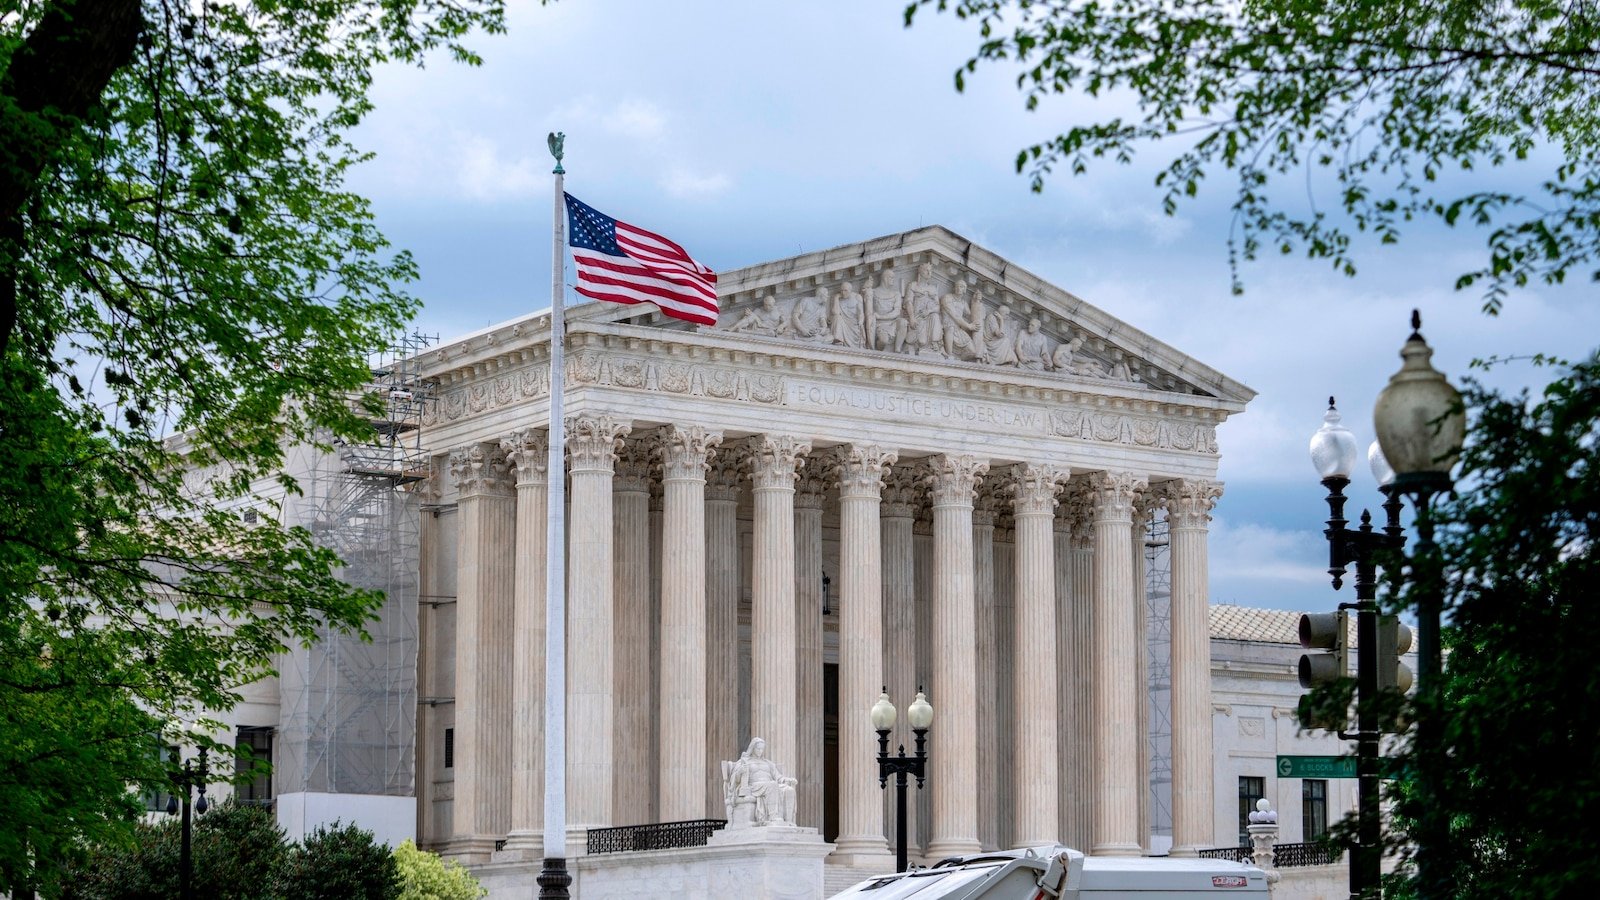 Supreme Court inadvertently posts 'document' about ruling in Idaho abortion case